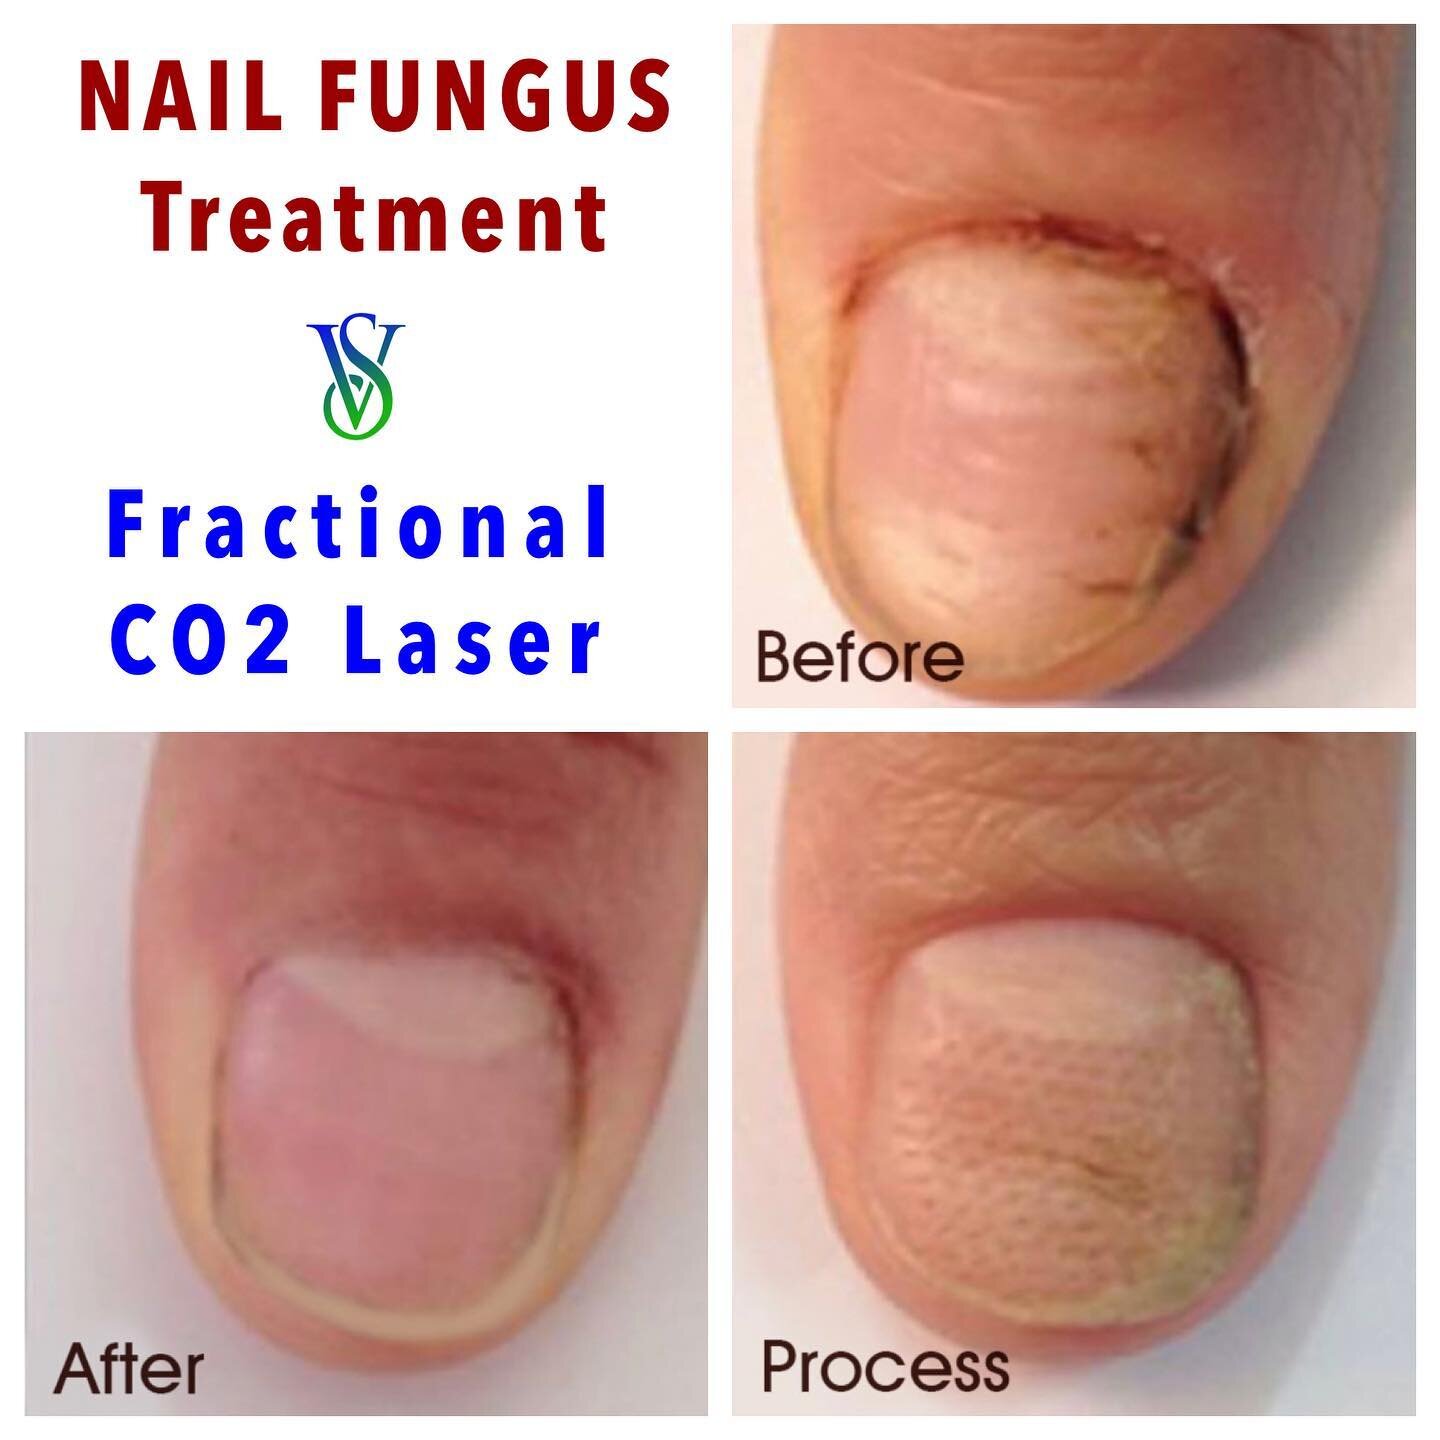 CO2 Laser - Nail Fungus Fractional Treatment. 
▫️
Combined CO2Fx Nail Fungus treatment with topical anti-fungals.
▫️
▫️

#skinrejuvenation, #skincare, #antiaging, #beauty, #skincareroutine, #skin, #botox, #glowingskin, #microneedling, #acne, #skintig